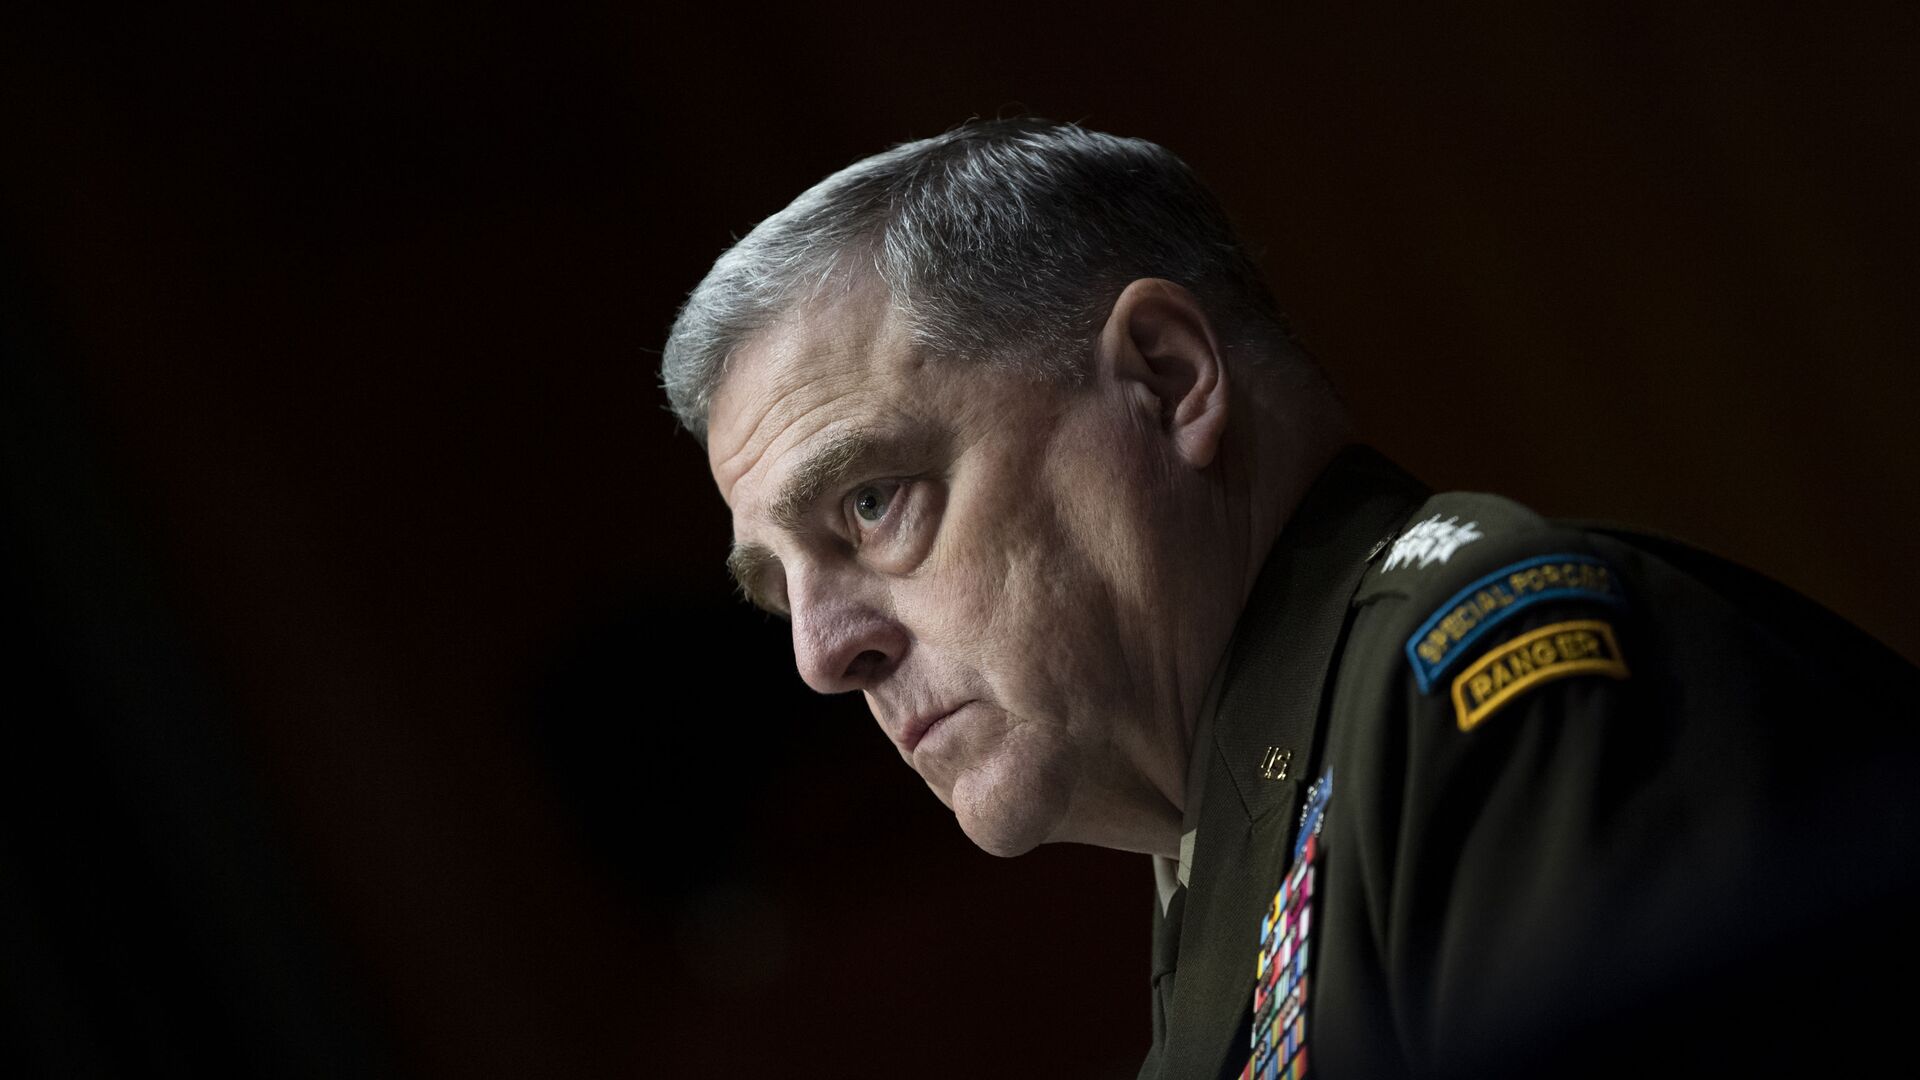 Chairman of the Joint Chiefs Chairman Gen. Mark Milley testifies before a Senate Appropriations Committee hearing to examine proposed budget estimates and justification for fiscal year 2022 for the Department of Defense in Washington on Thursday, June 17, 2021. - Sputnik International, 1920, 16.07.2021